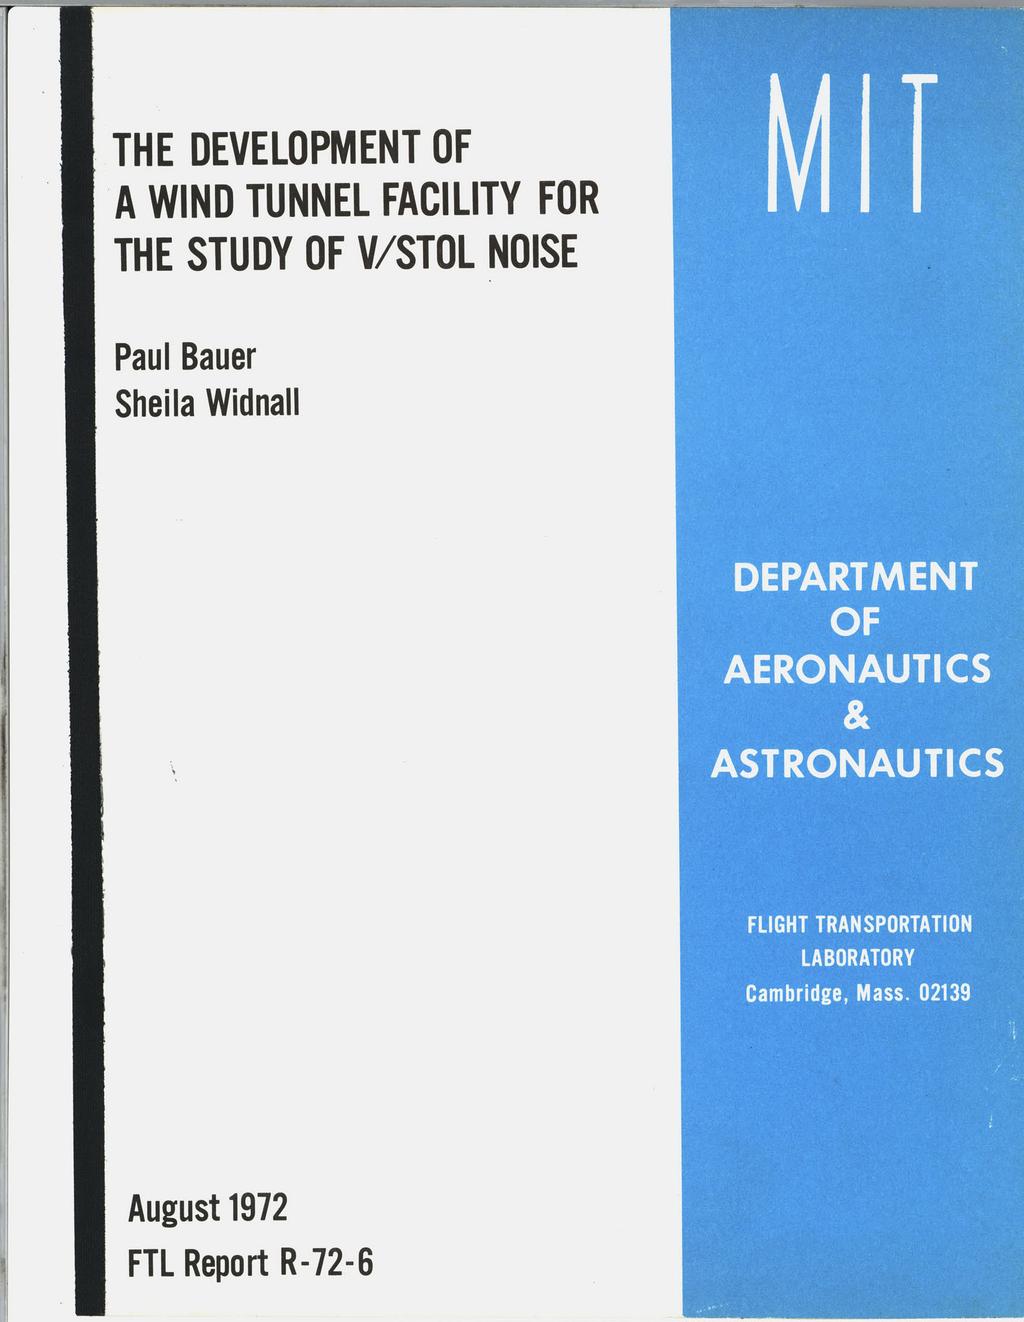 THE DEVELOPMENT OF A WIND TUNNEL FACILITY FOR THE STUDY OF